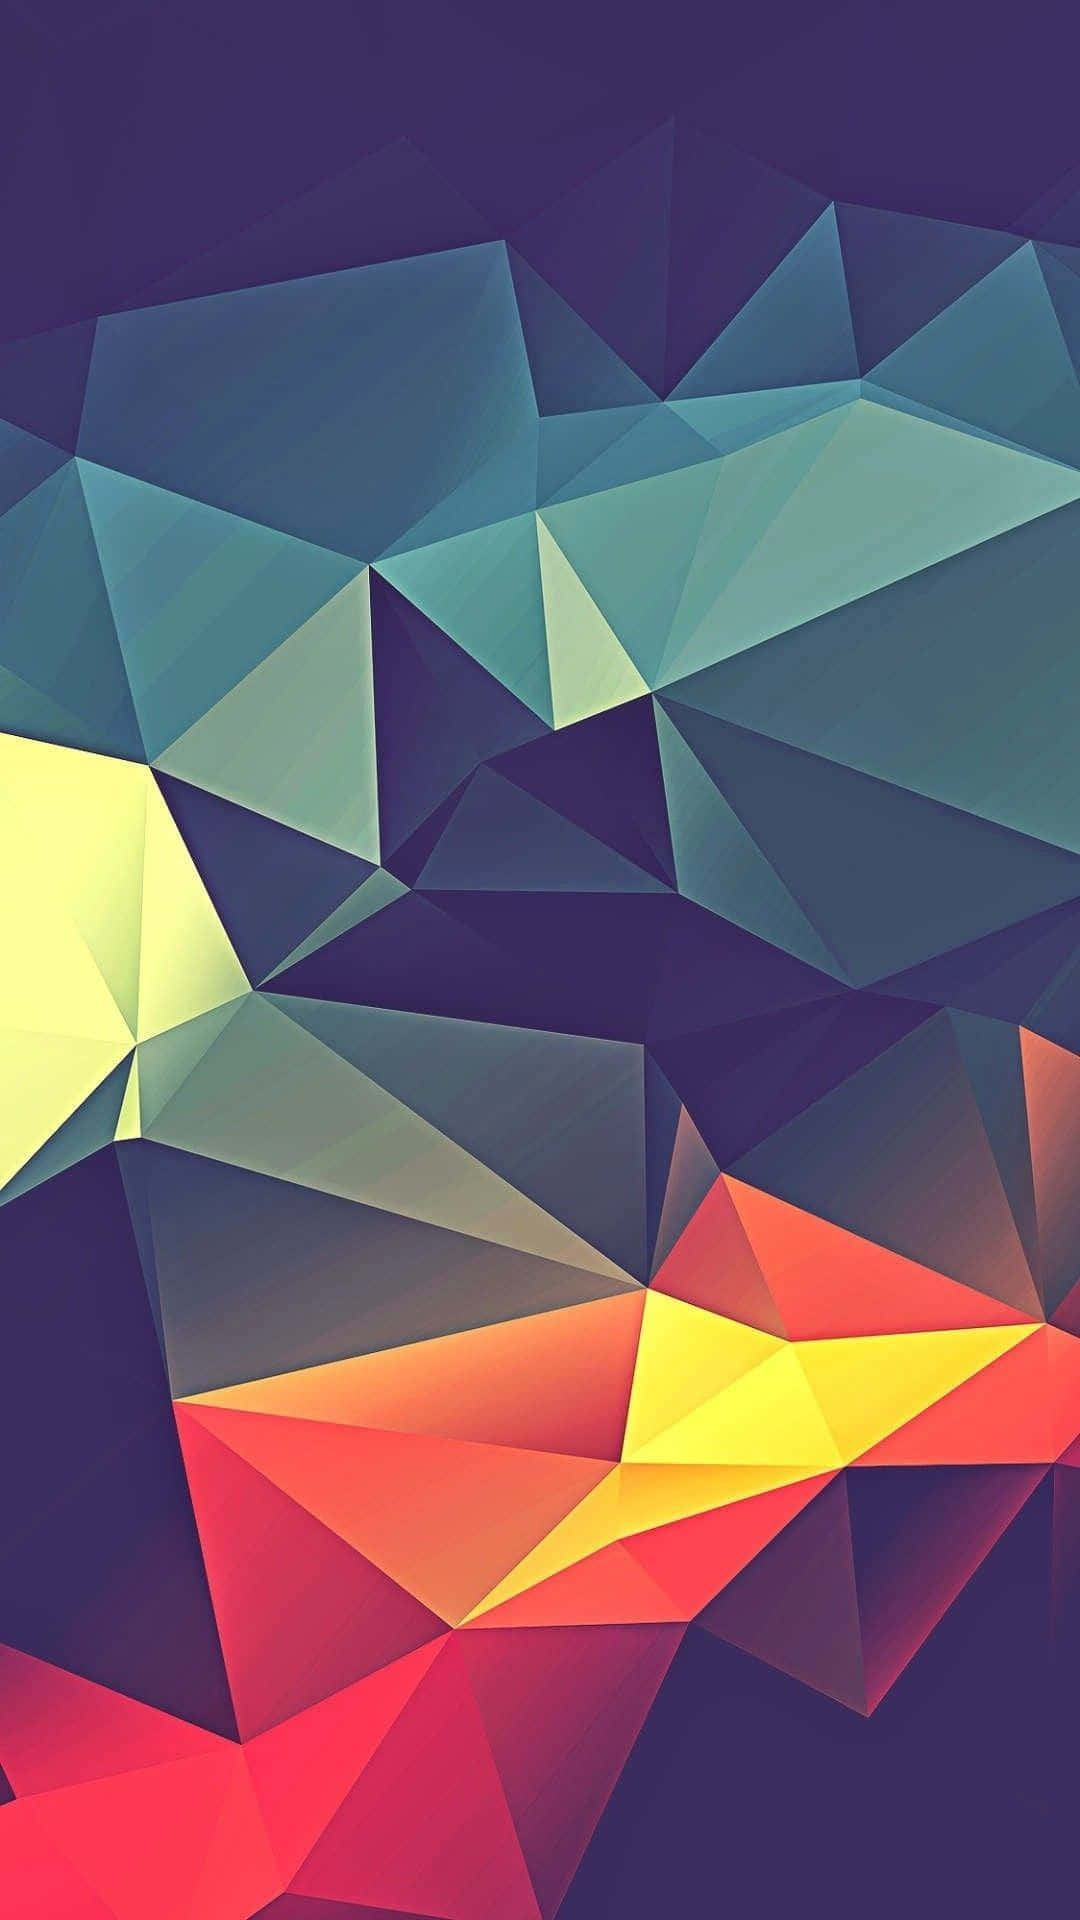 Iphone X Abstract Geometrical Shapes Wallpaper